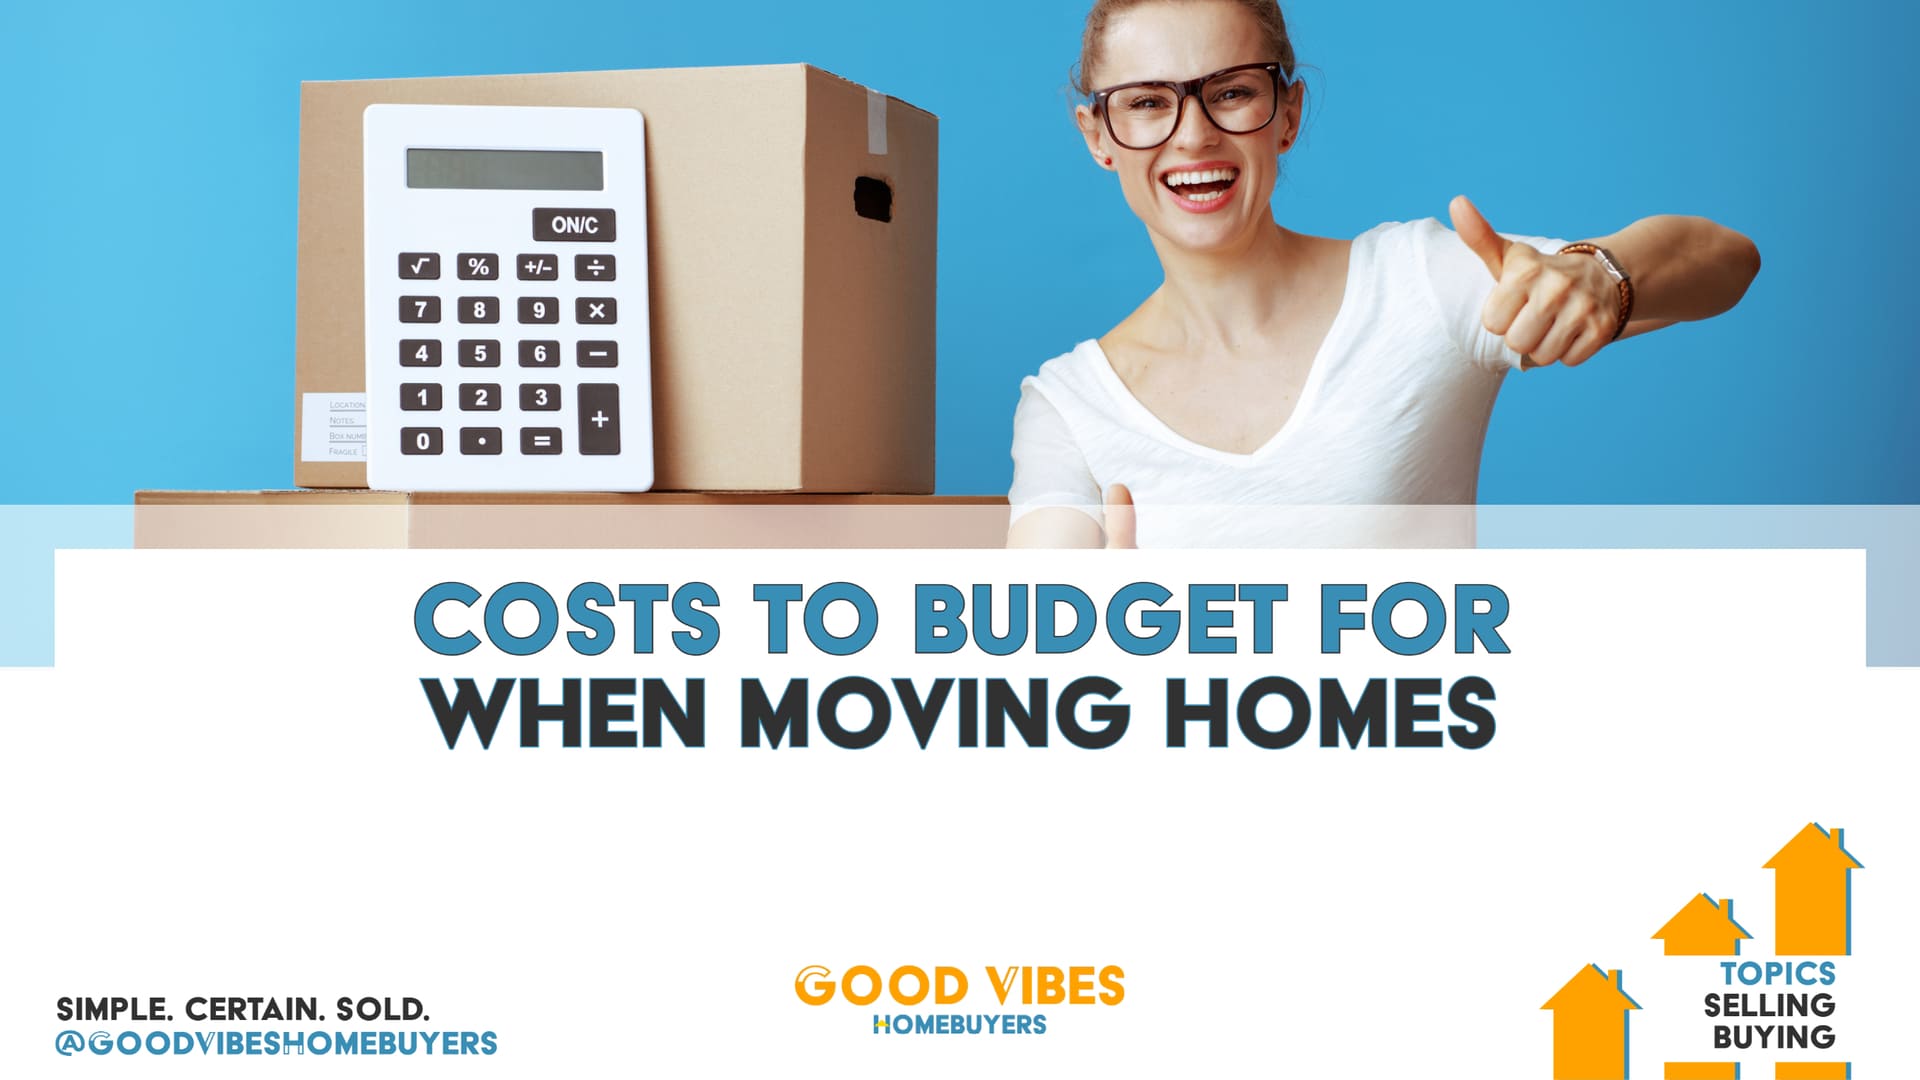 Costs to Budget for When Moving Homes